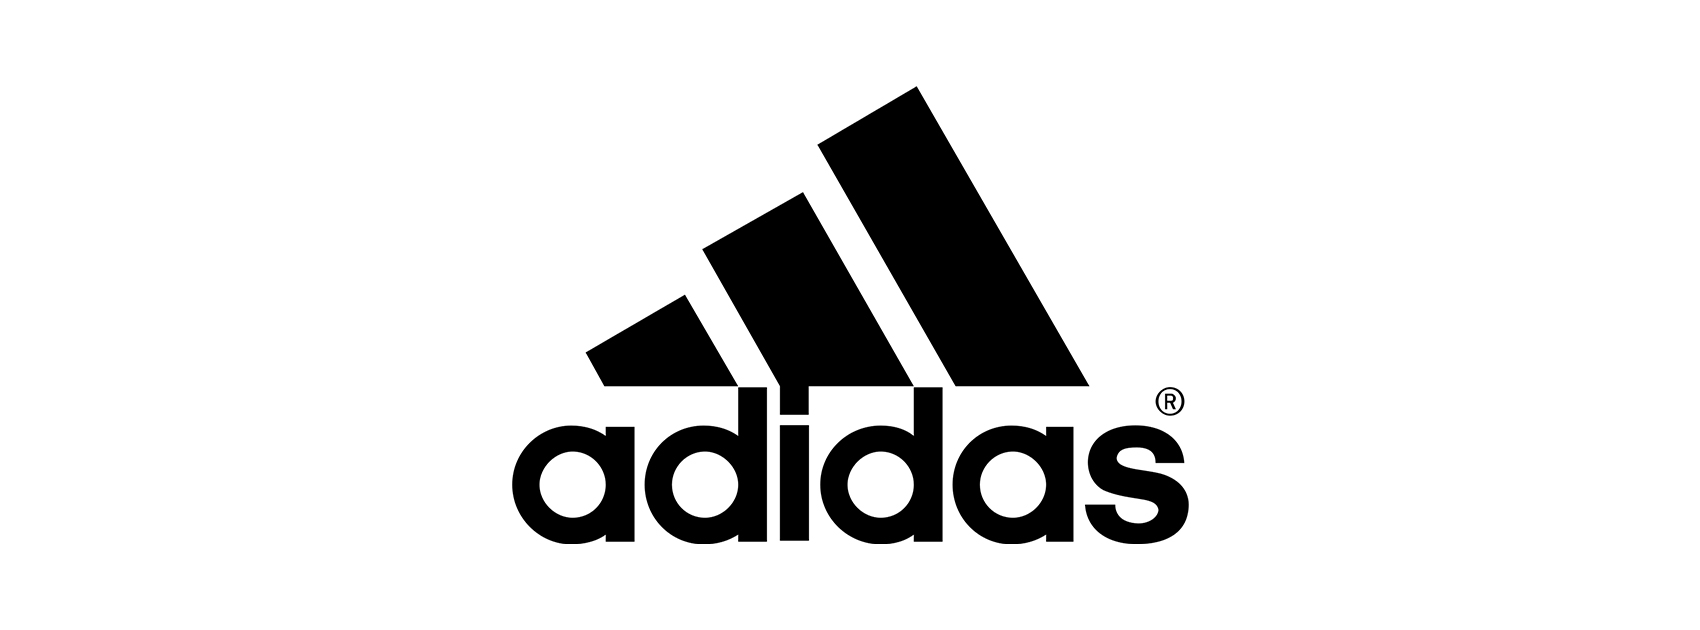 Adidas Unknown Facts | Unknown Facts 